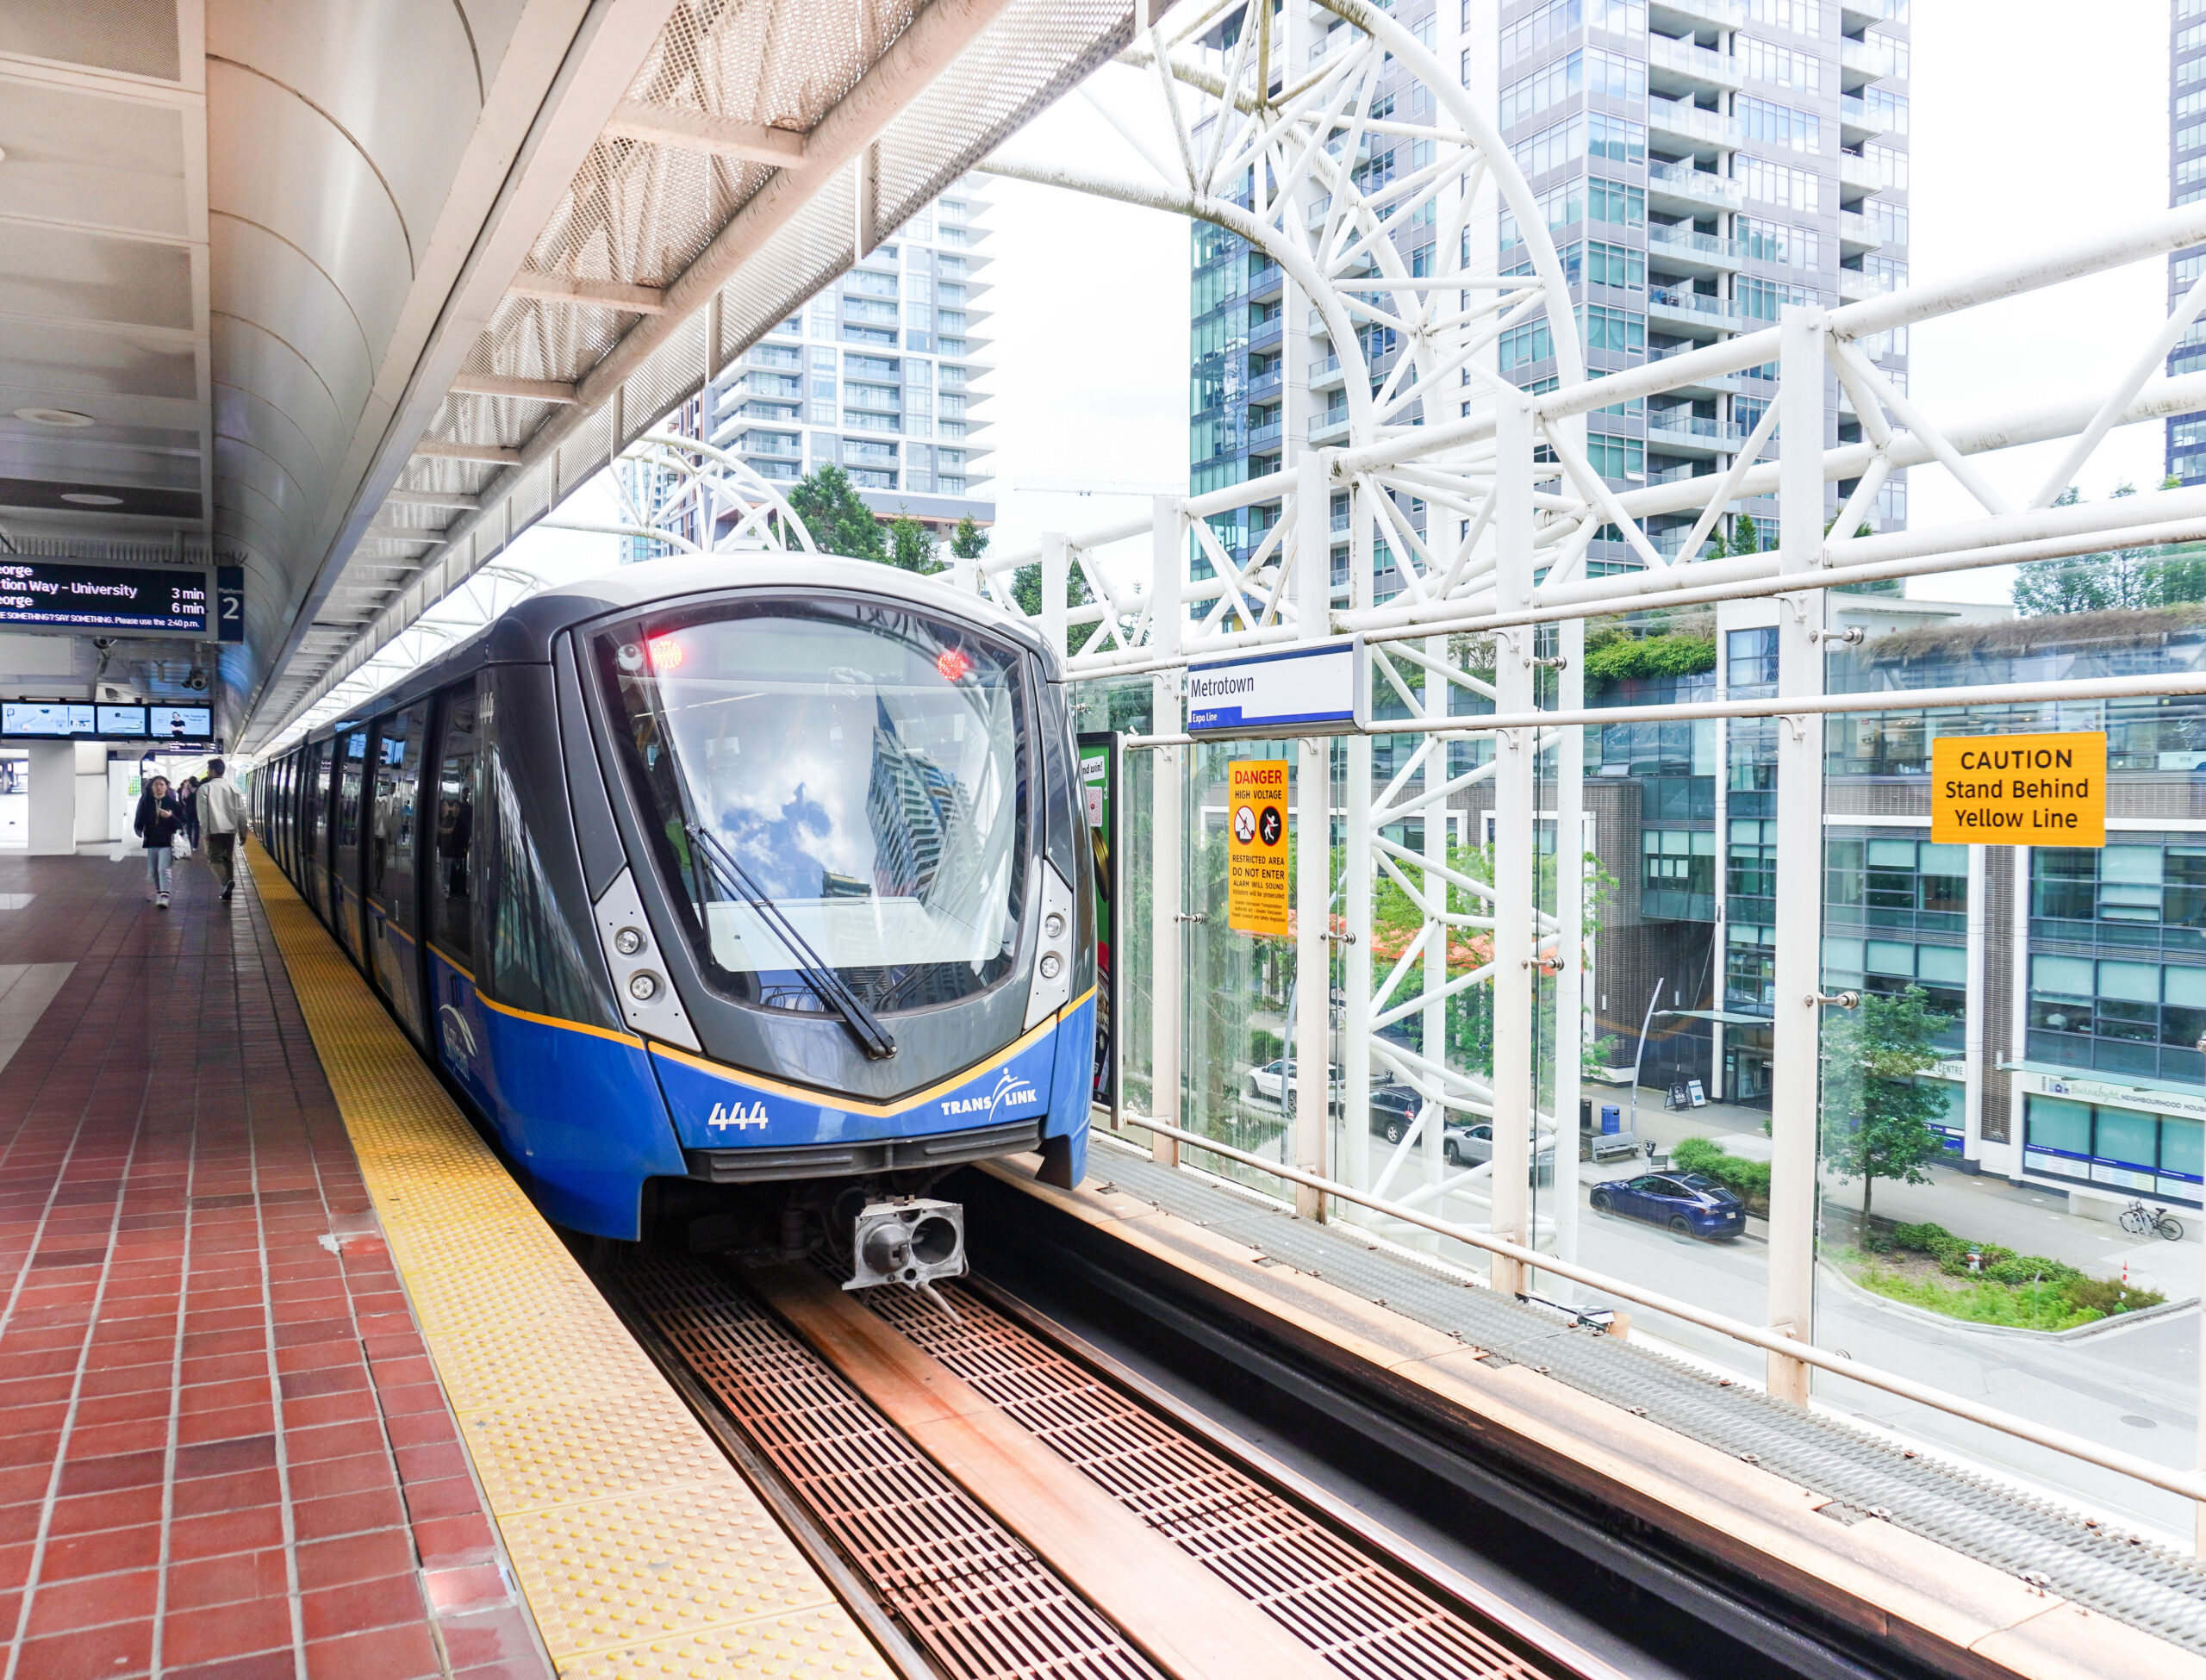 SkyTrain arriving at the Metrotown SkyTrain station